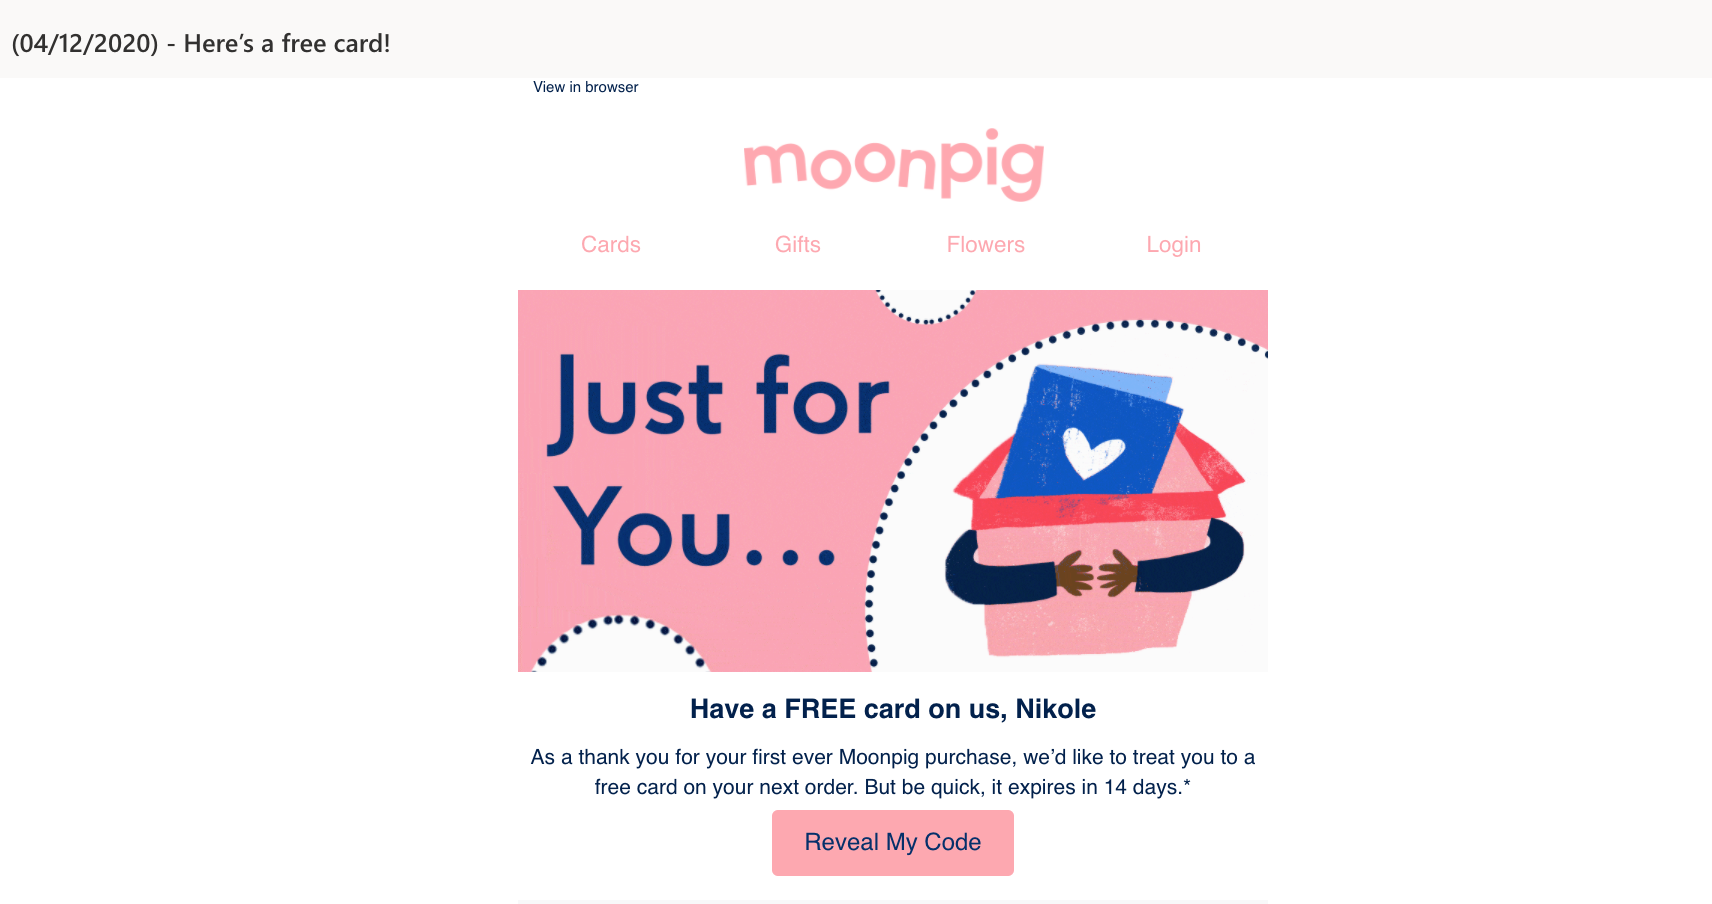 reciprocity nudge marketing email example